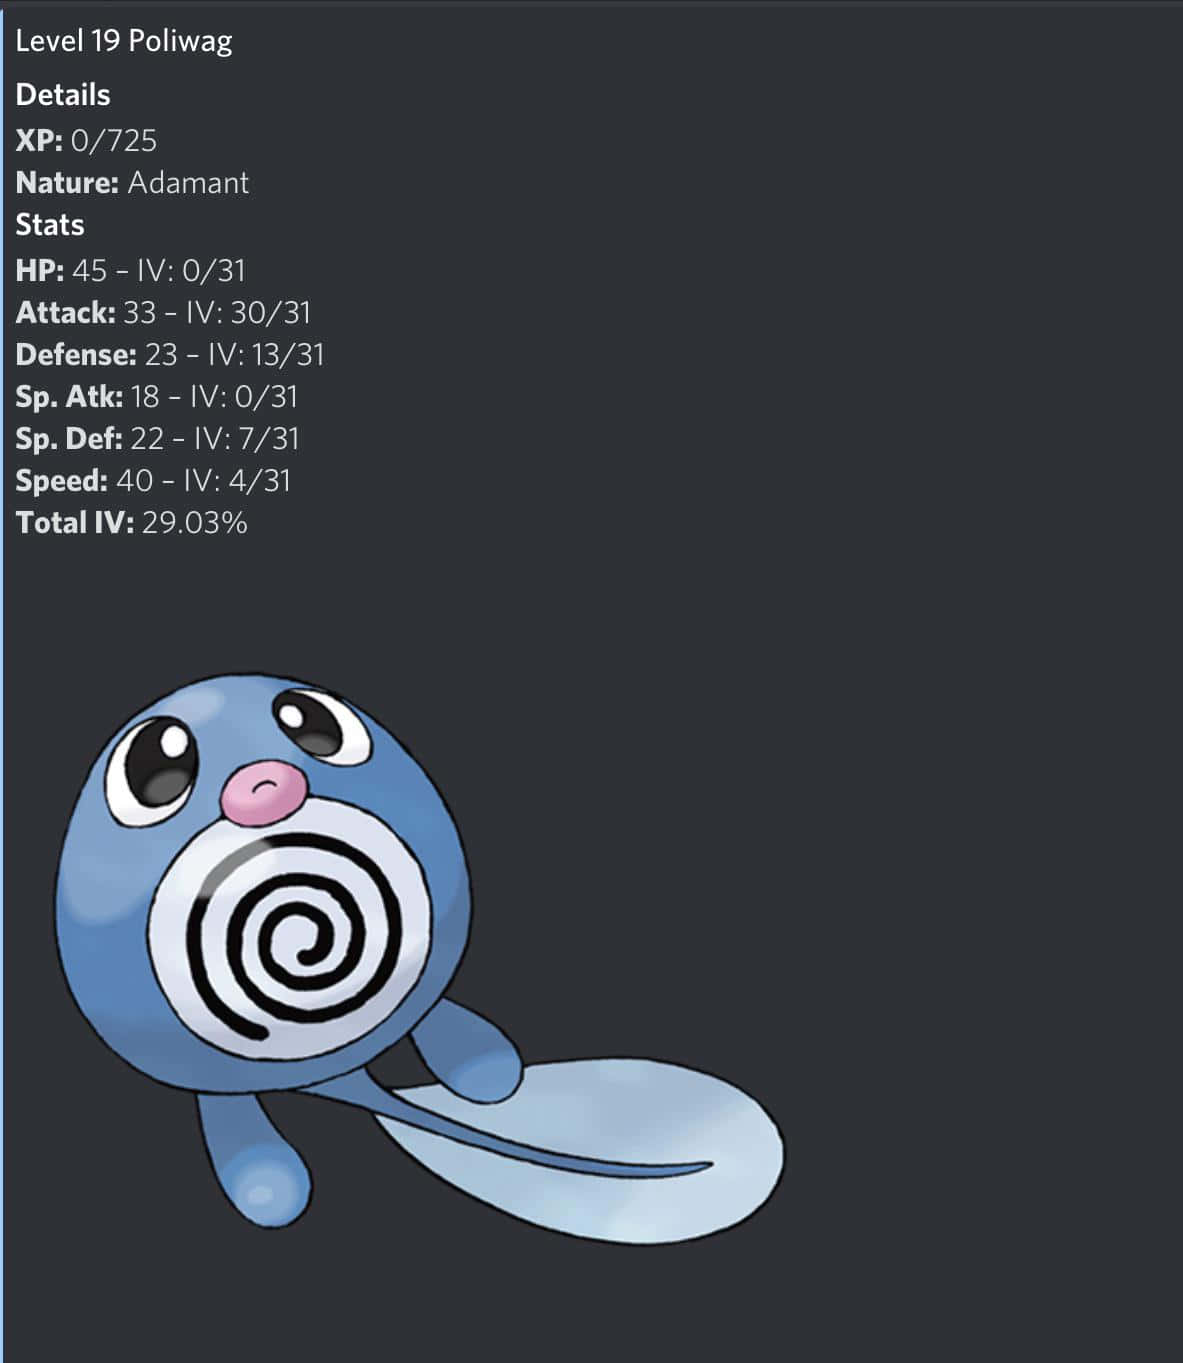 Level 19 Poliwag in Action Wallpaper